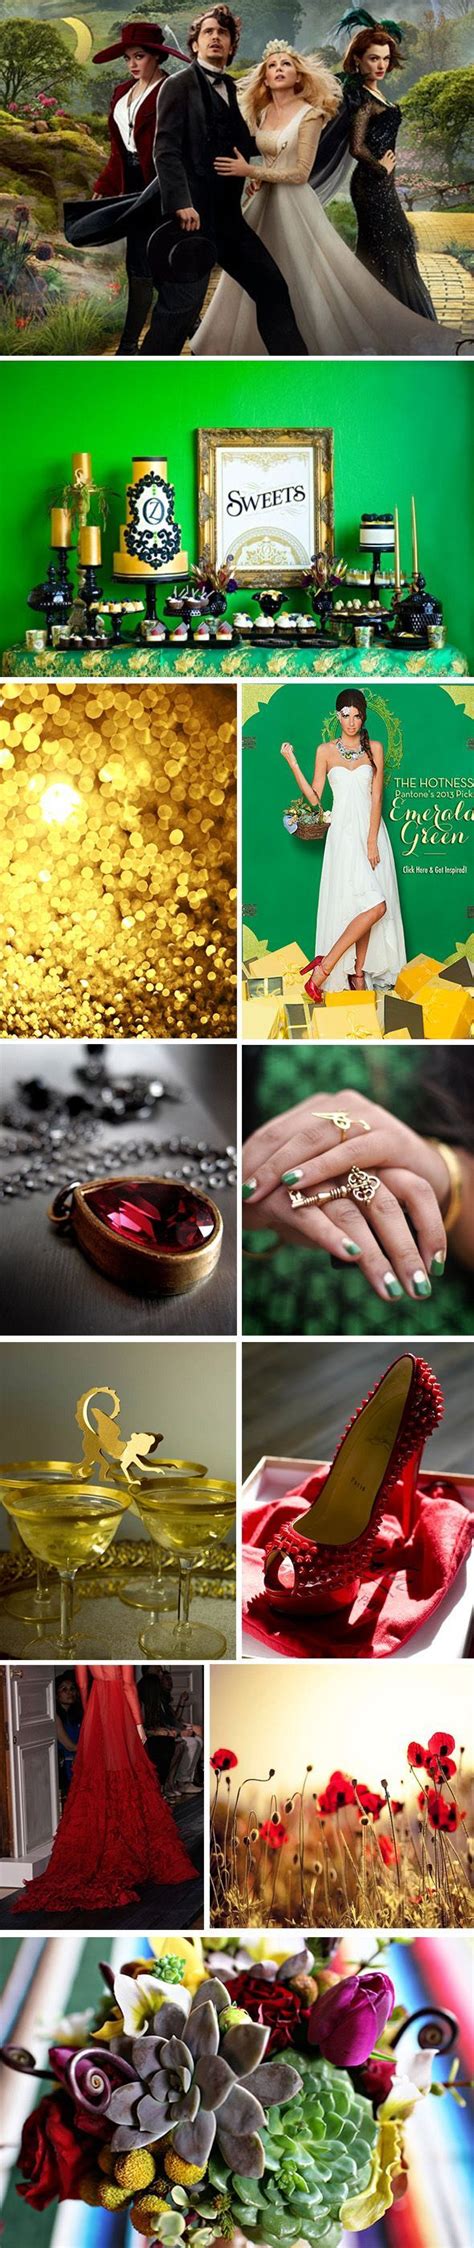 17 Best Images About Wizard Of Oz Wedding On Pinterest Emerald City